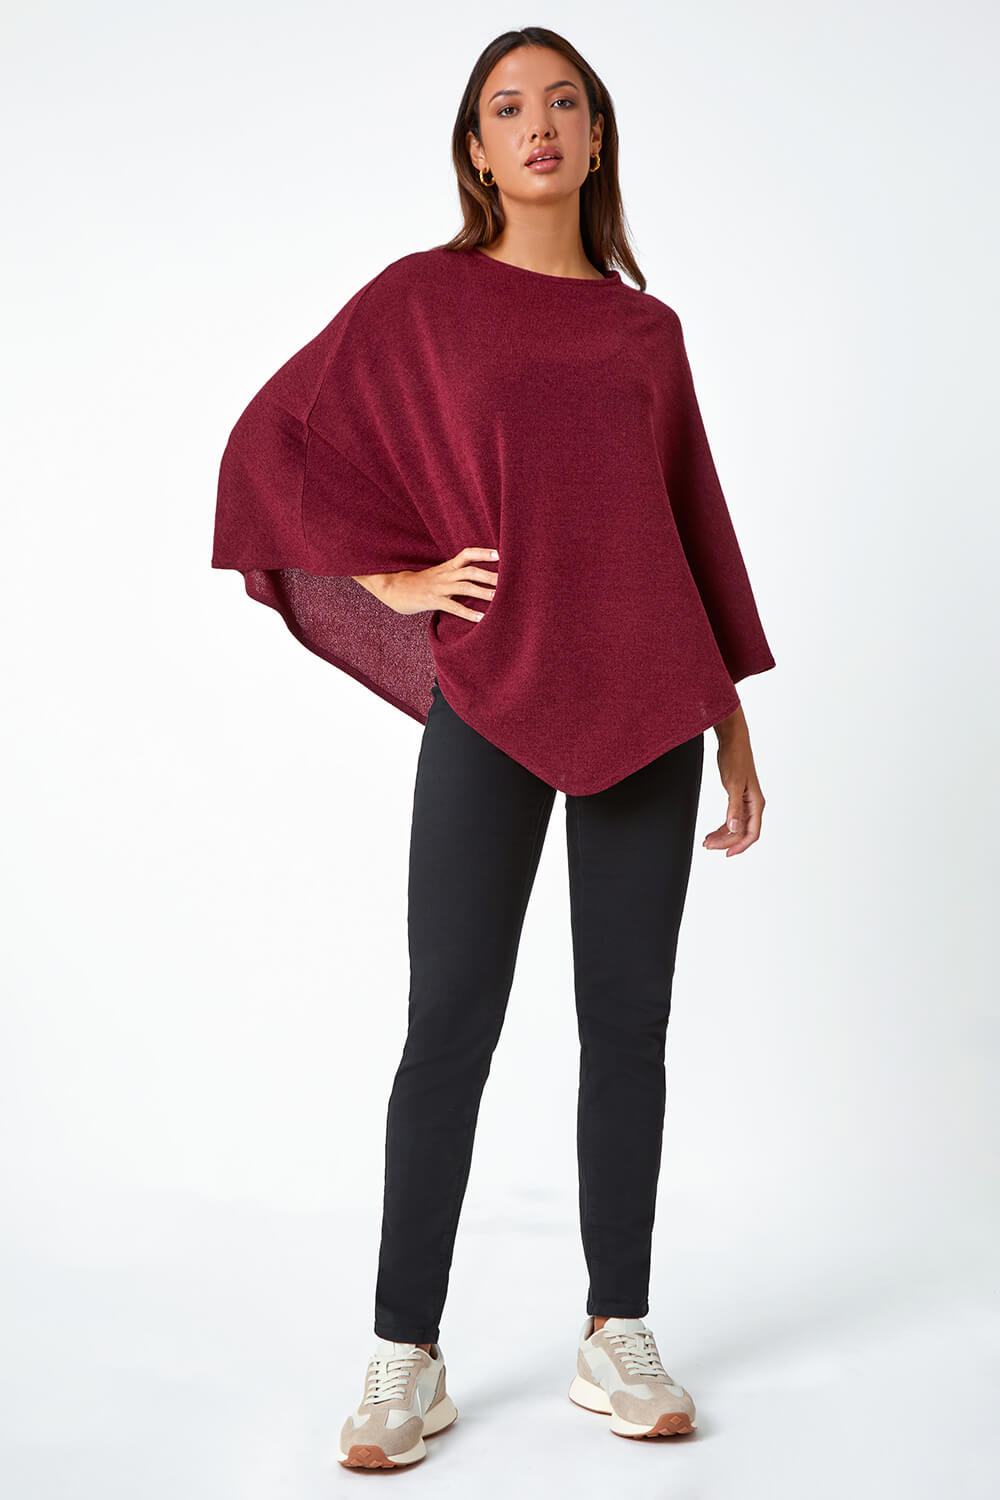 Wine Marl Overlay Stretch Top, Image 2 of 5